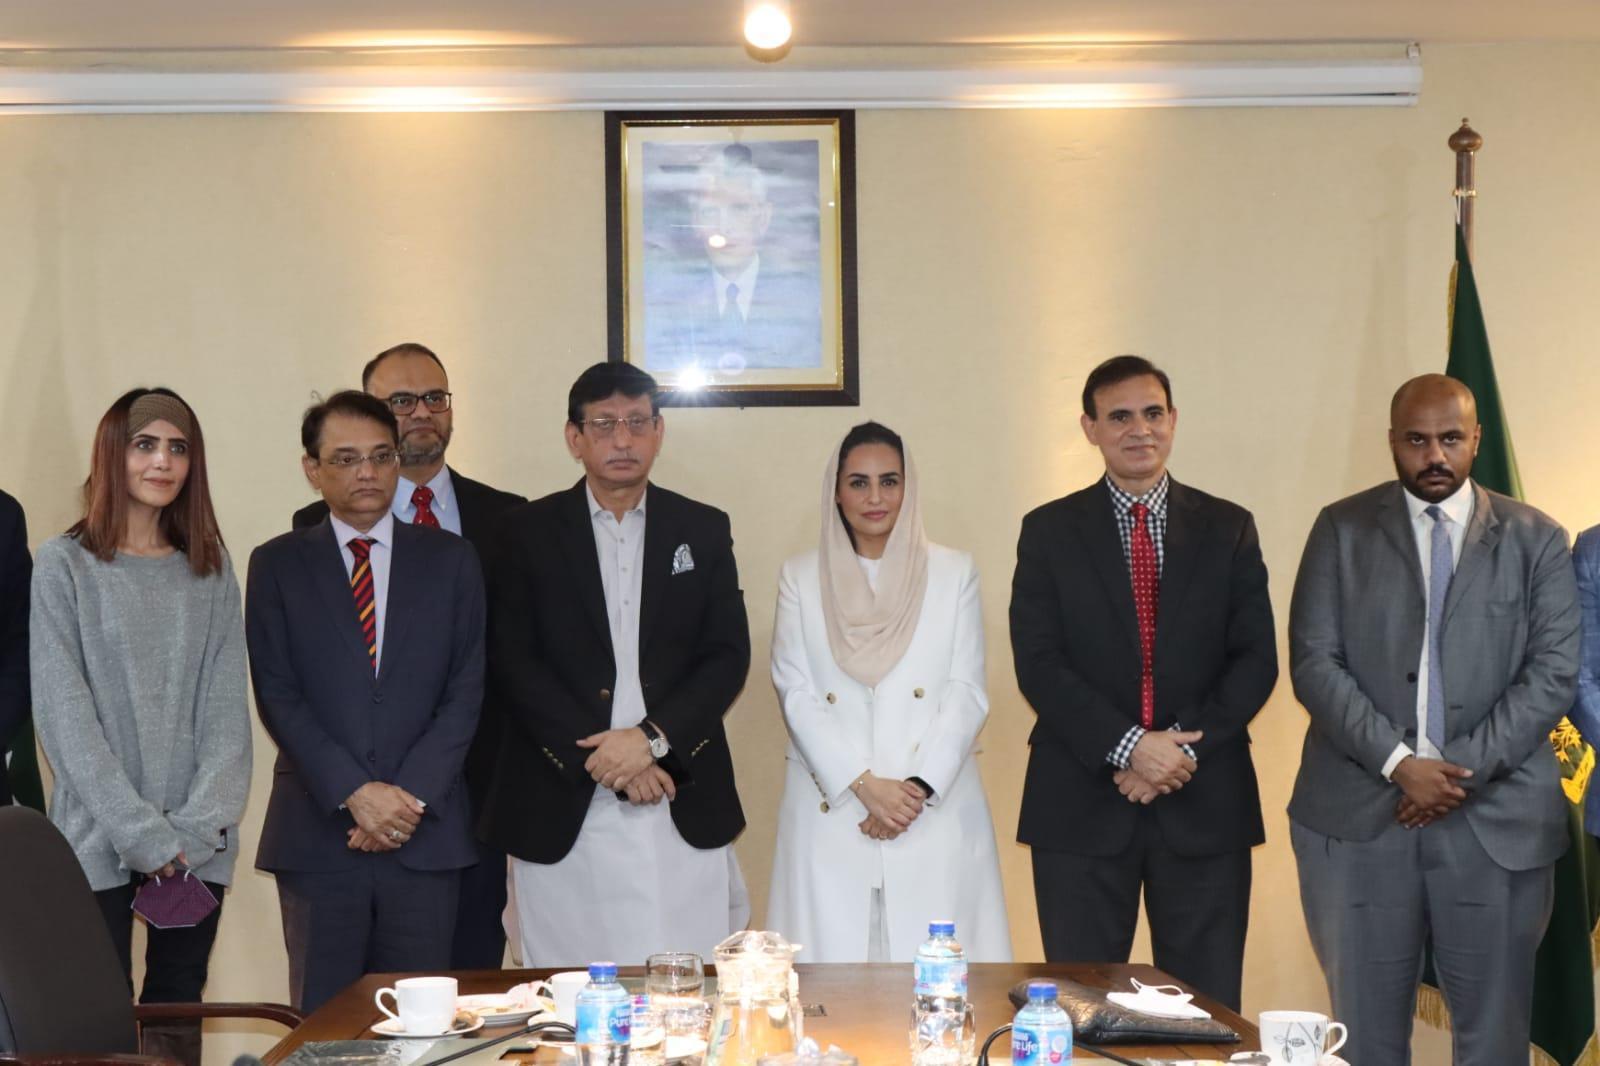 Inaugural Visit Of The DCO To Pakistan Delivers Progress For Digital Economy